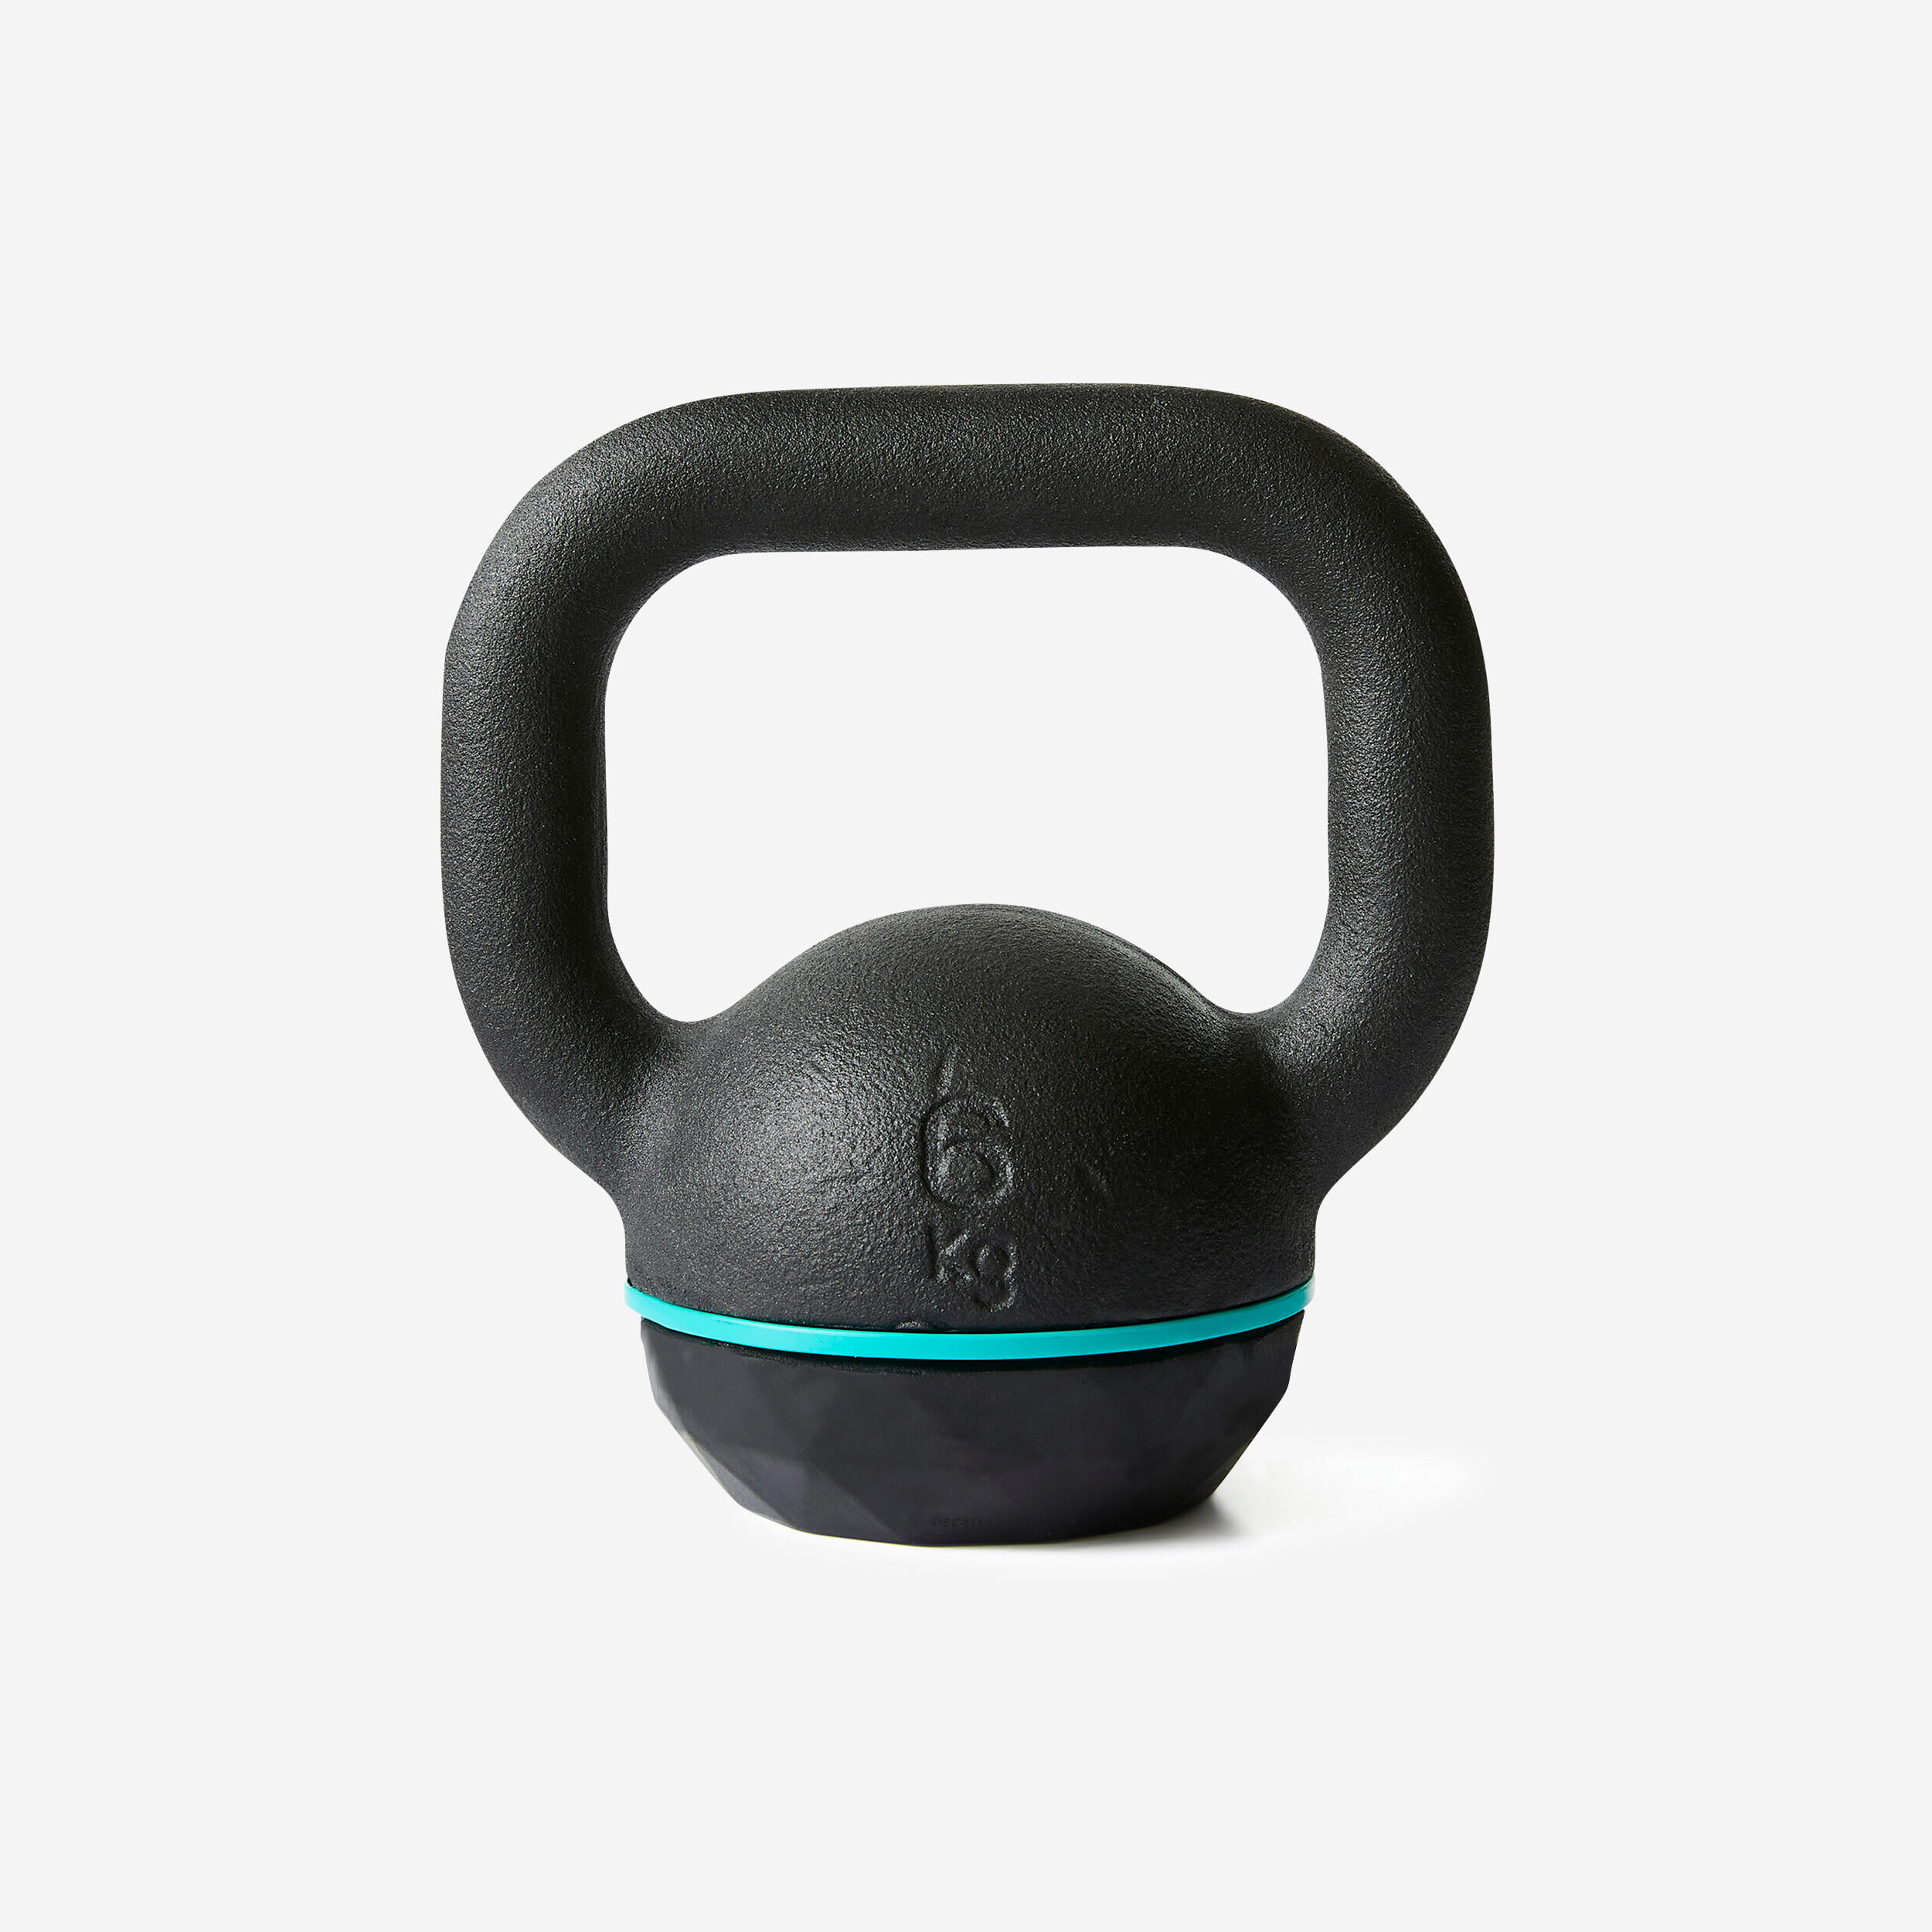 CORENGTH Cast Iron Kettlebell with Rubber Base 6 kg